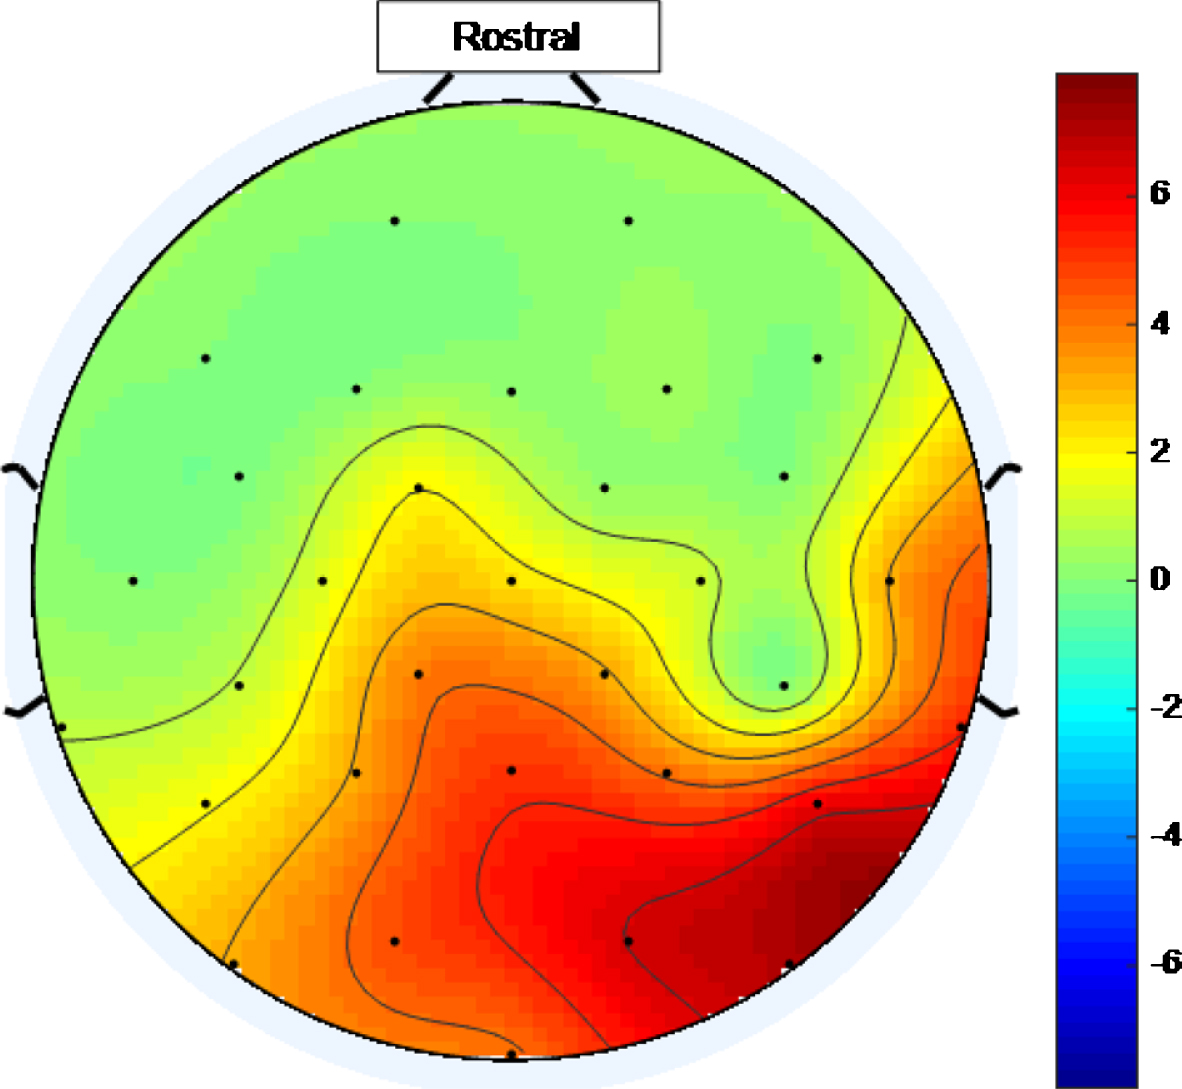 Scalp map for low intensity 40 Hz stimulus for healthy volunteer 1. Areas represented by colors above 0 on the color bar represent a 40 Hz entrainment response with values that are higher on the color scale having 40 Hz peaks that are higher above the average PSD value in the 25 Hz–45 Hz range.